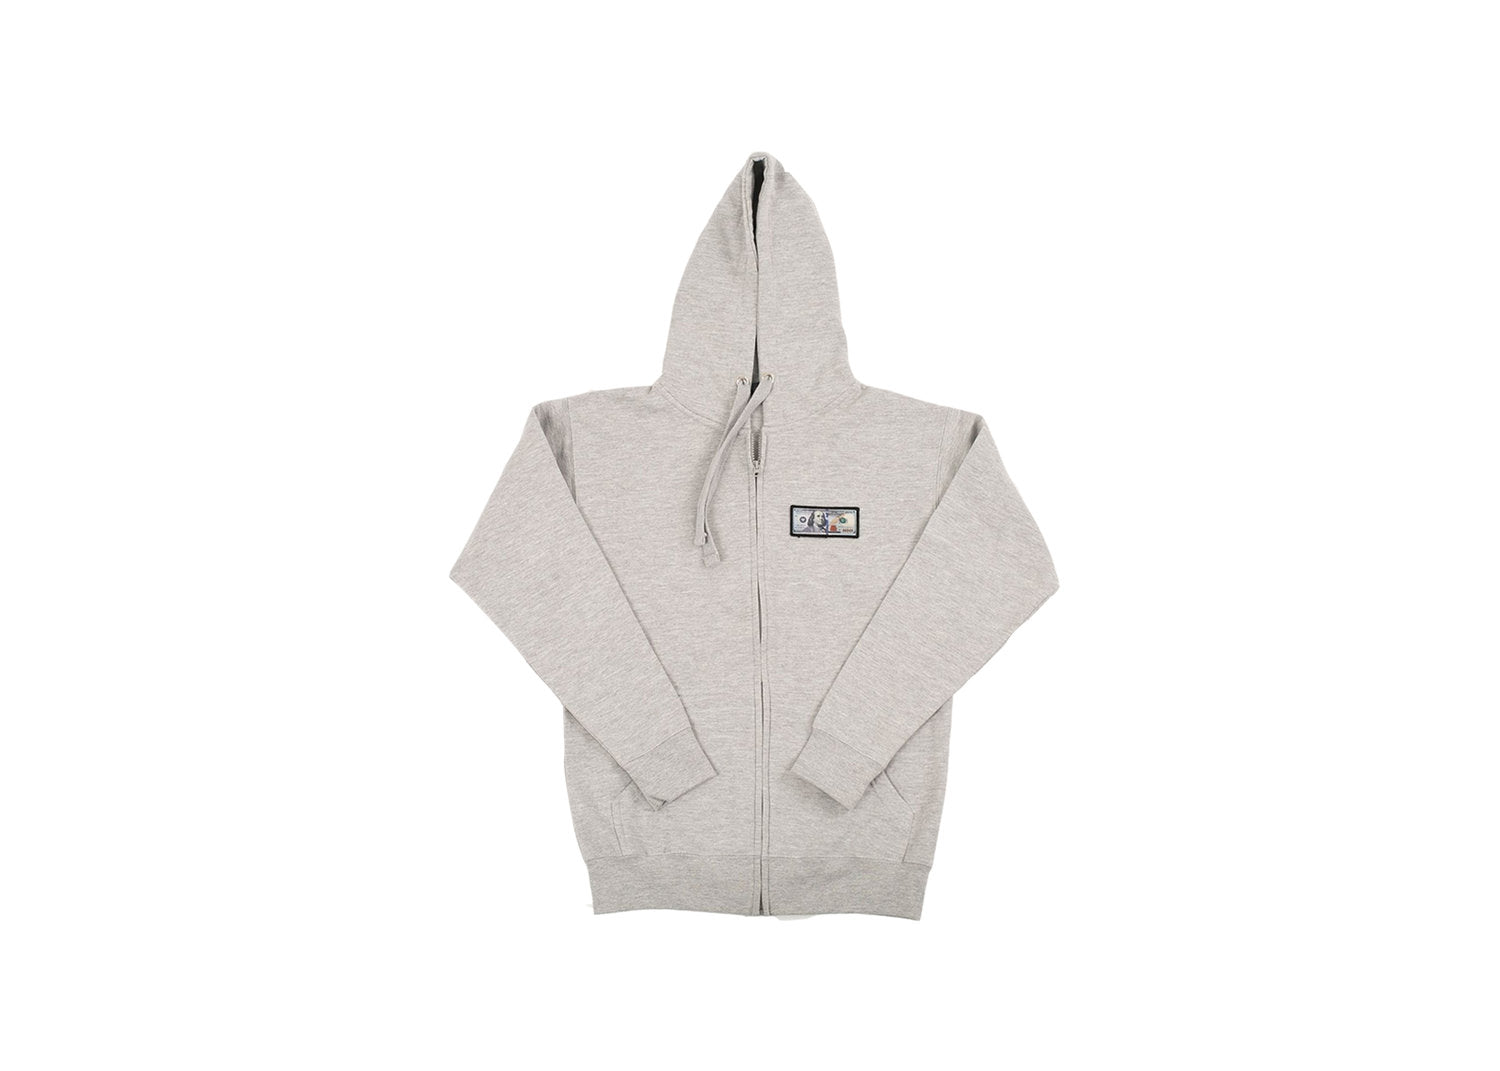 Grey 'Blue Hundreds' Zip Up Hoodie by Twenty1Rich with a $100 logo